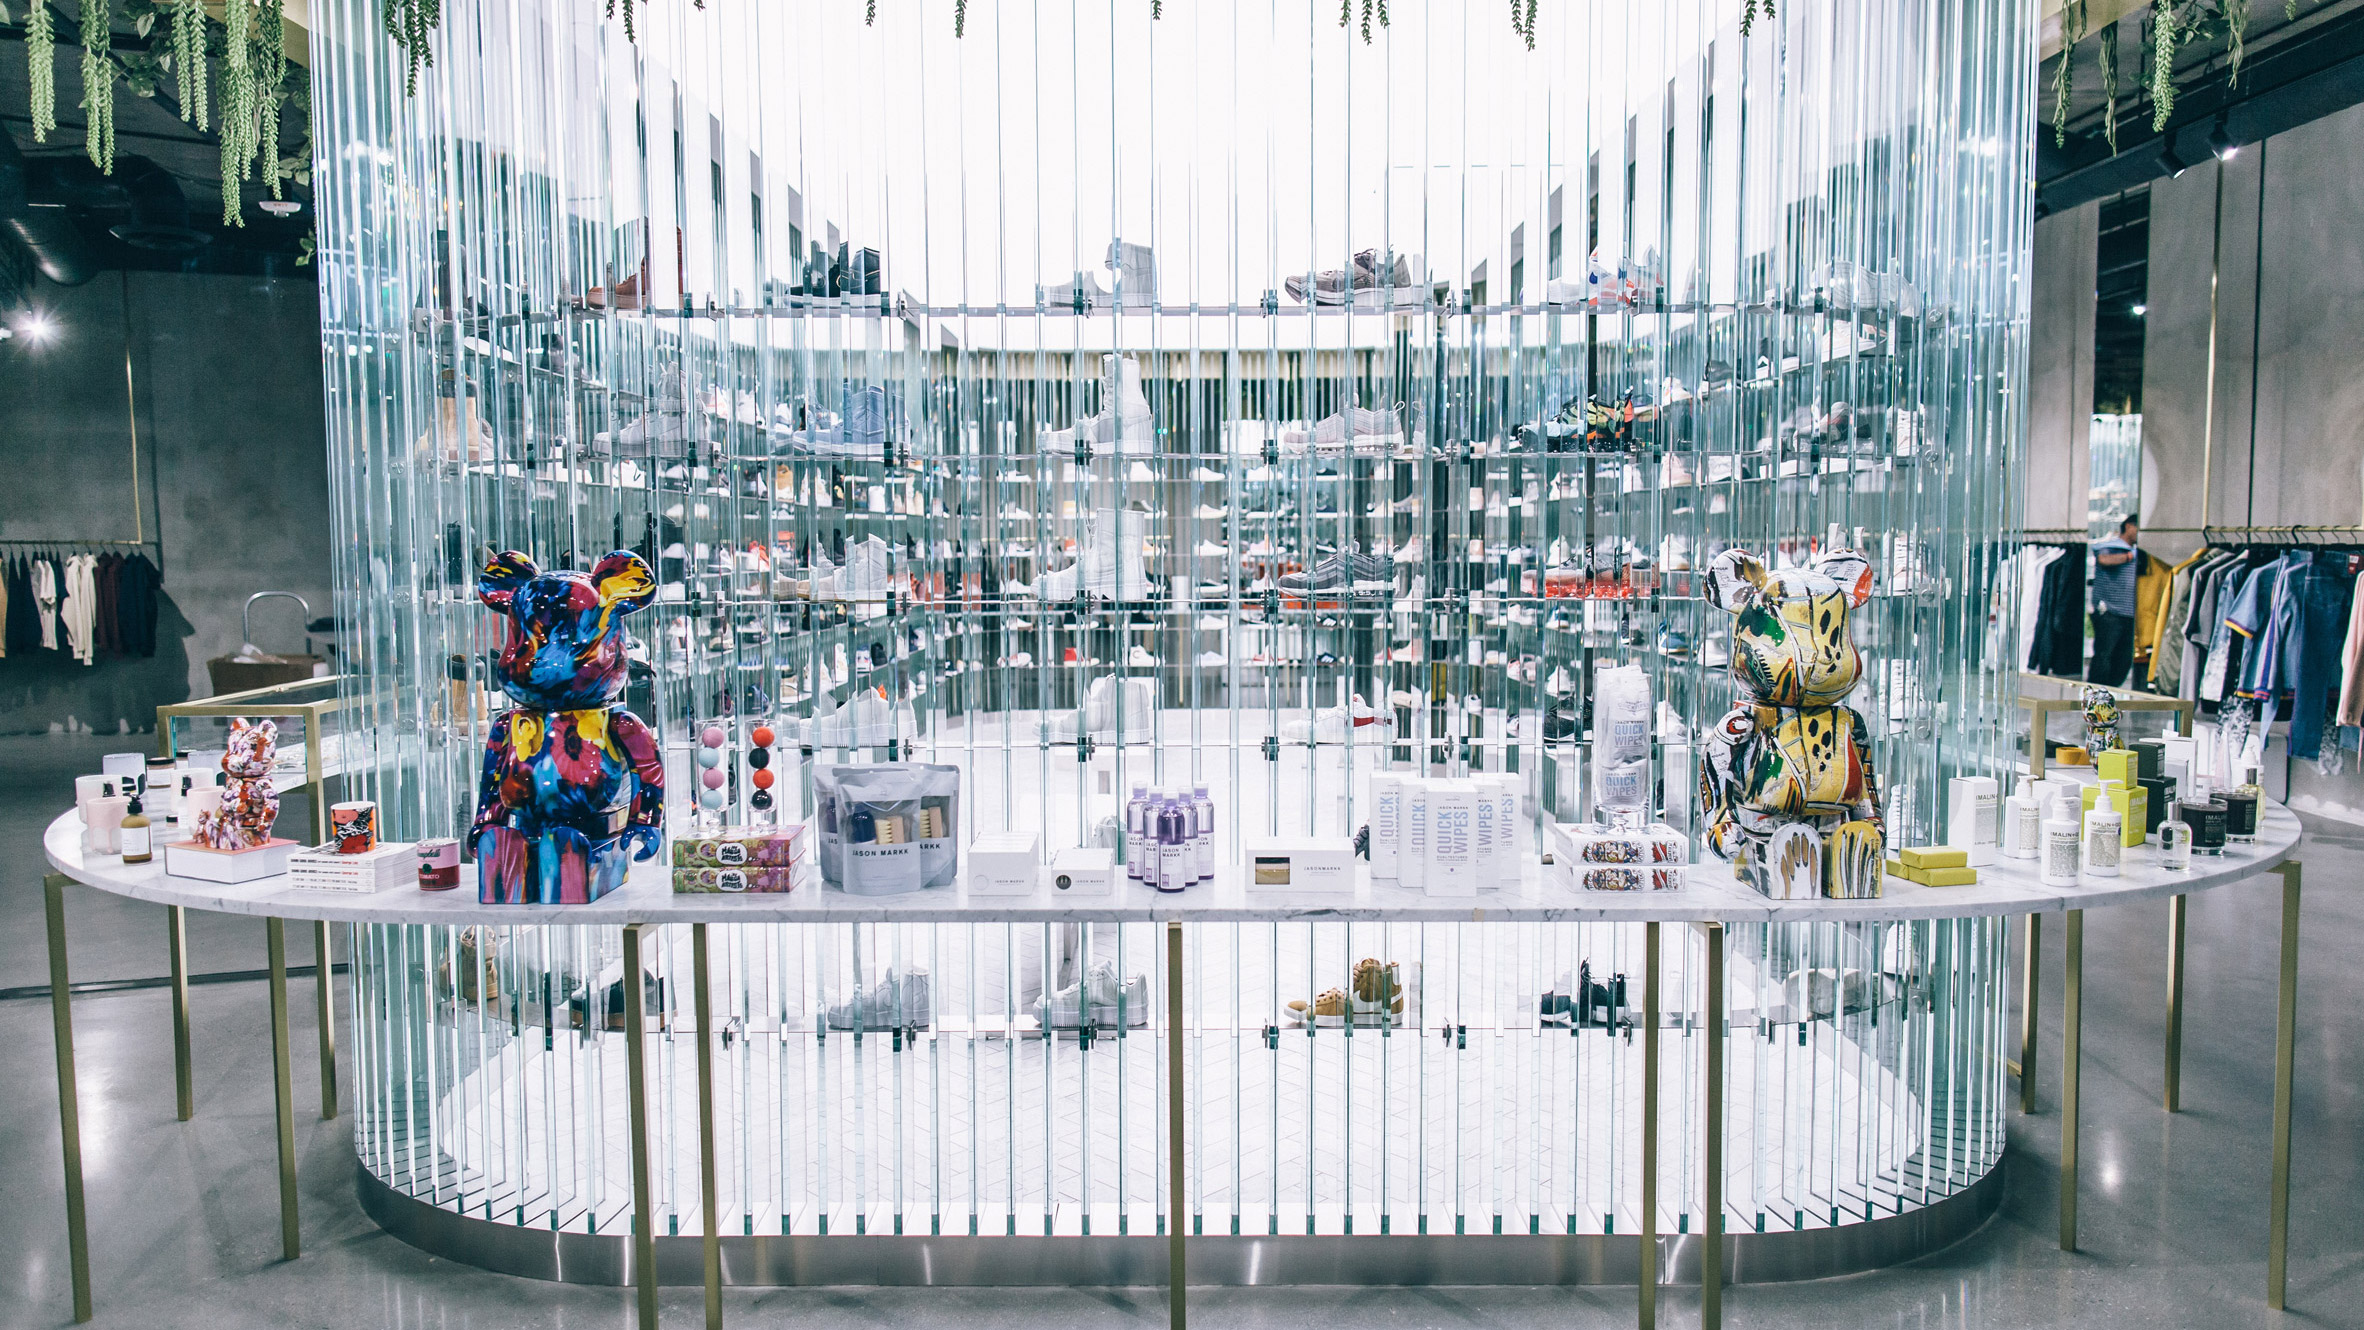 Snarkitecture uses recycled materials for Pharrell Williams' store in Miami